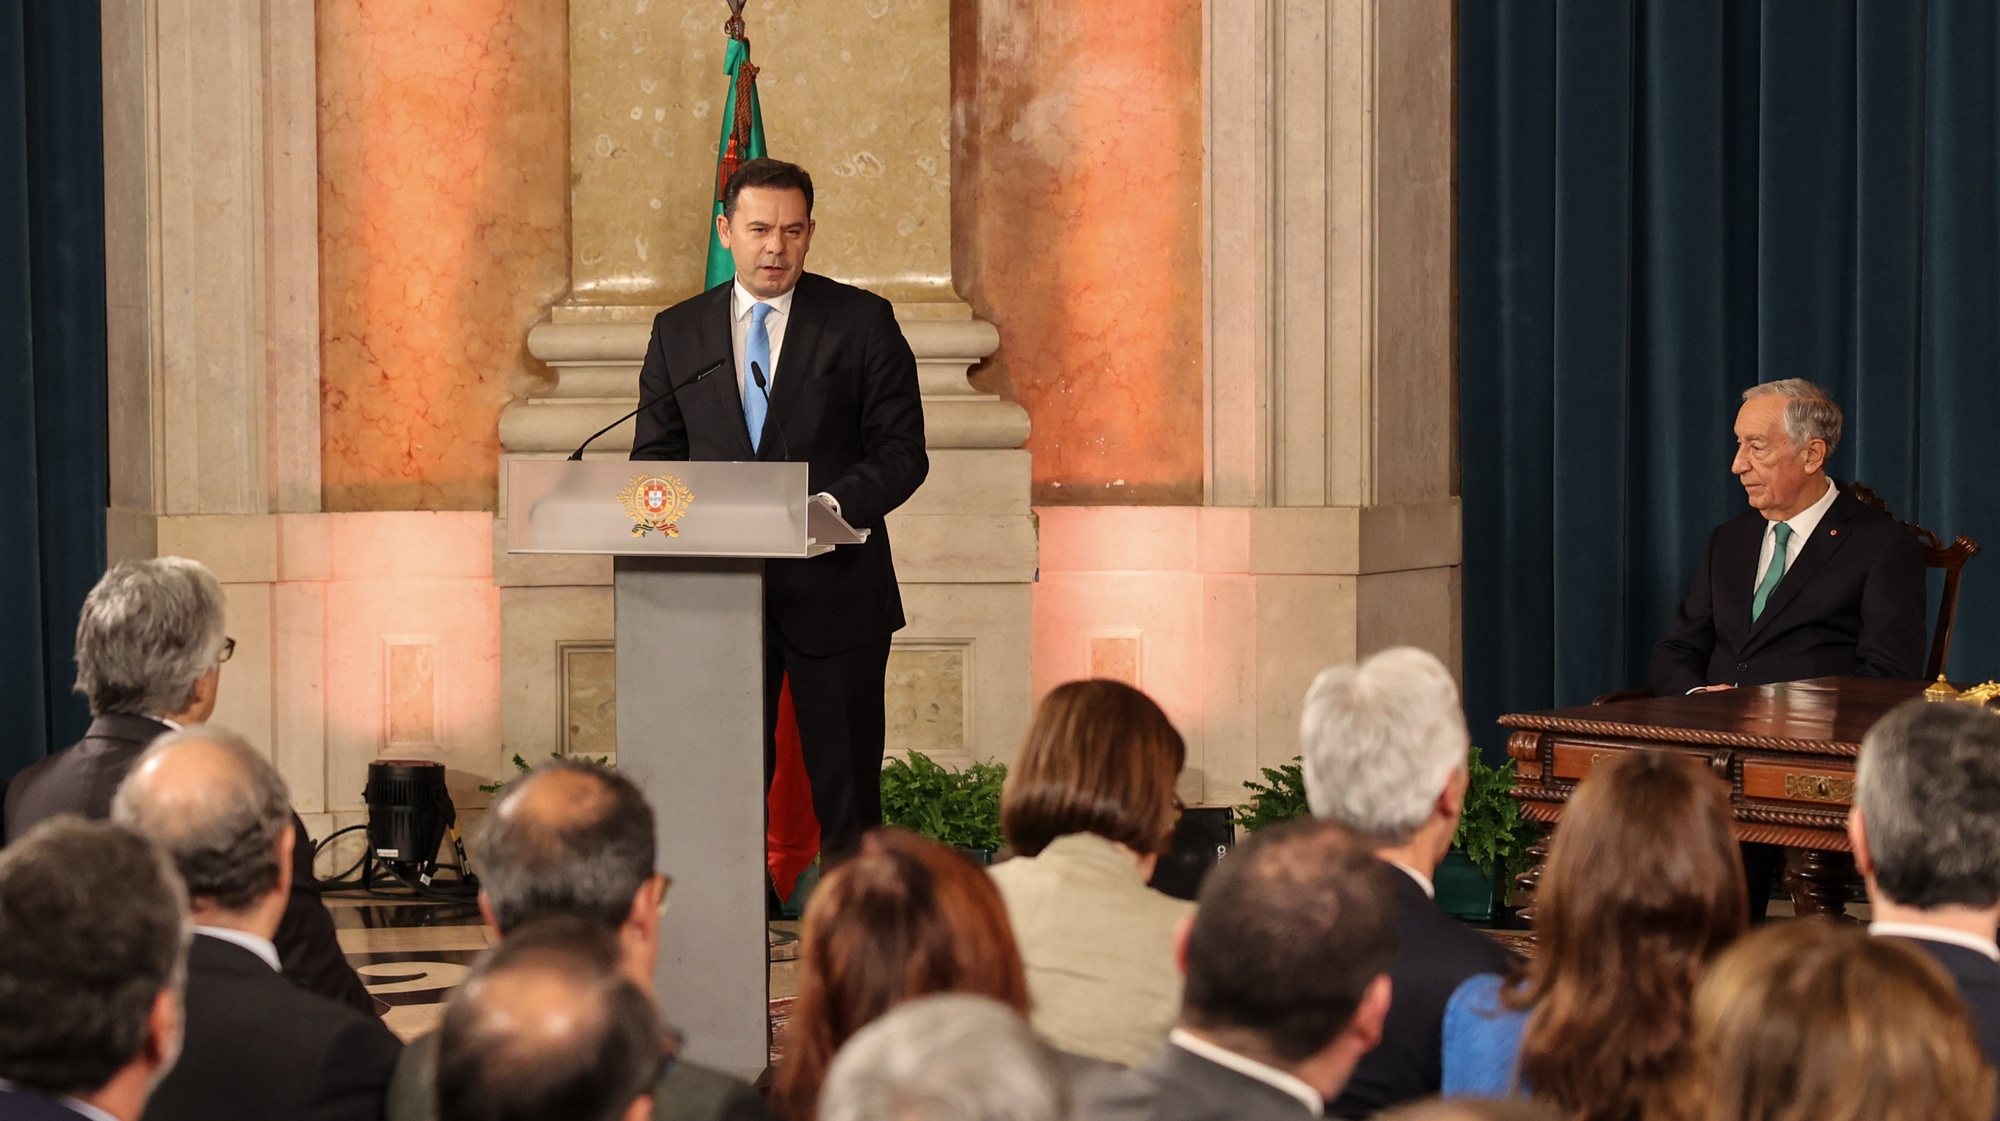 The new Portuguese Prime Minister Luis Montenegro, speak during the swearing in cerimony of the XXIV Constitutional Government held at Ajuda Palace, in Lisbon, Portugal, 02 April March 2024. These legislative elections resulted in the victory of AD - a pre-election coalition formed by PSD, CDS-PP and People&#039;s Monarchist Party (PPM) - by around 54,000 votes (0.85%) more than the PS, the narrowest margin in the history of Portuguese democracy. The two coalitions led by the PSD (the AD on the mainland and in the Azores, and Madeira Primeiro with the PSD and CDS-PP in Madeira) - won 28.83% of the votes and 80 members of parliament (78 for the PSD and two from the CDS-PP), according to the official results. The PS was the second-most-voted party with 27.98% and 78 MPs. JOAO RELVAS/LUSA